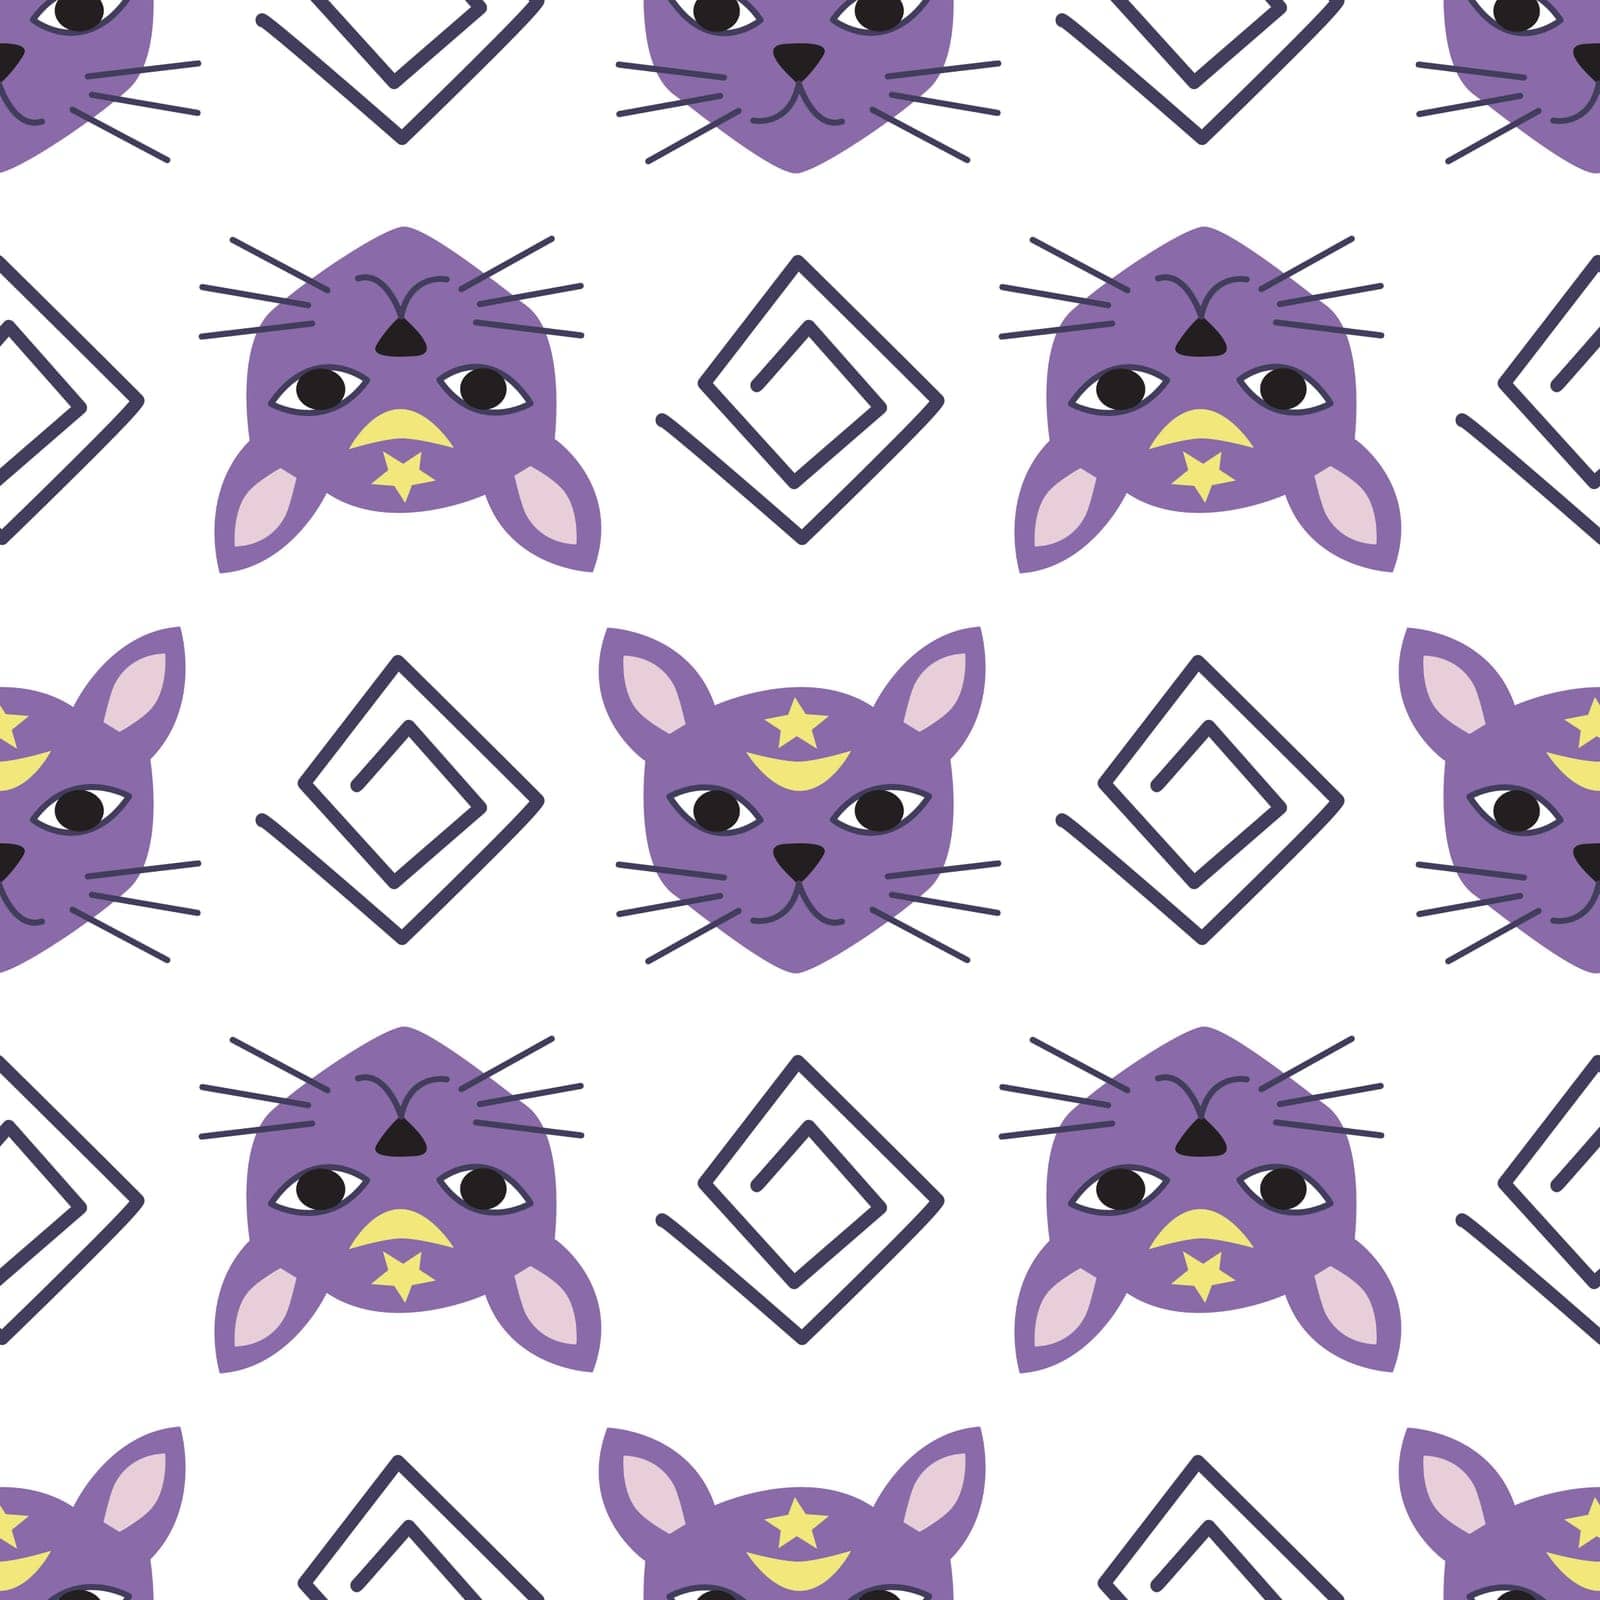 Feline seamless pattern. Cat heads with moon and stars background. Magic print with cats and squiggles for textile, paper, packaging, vector illustration